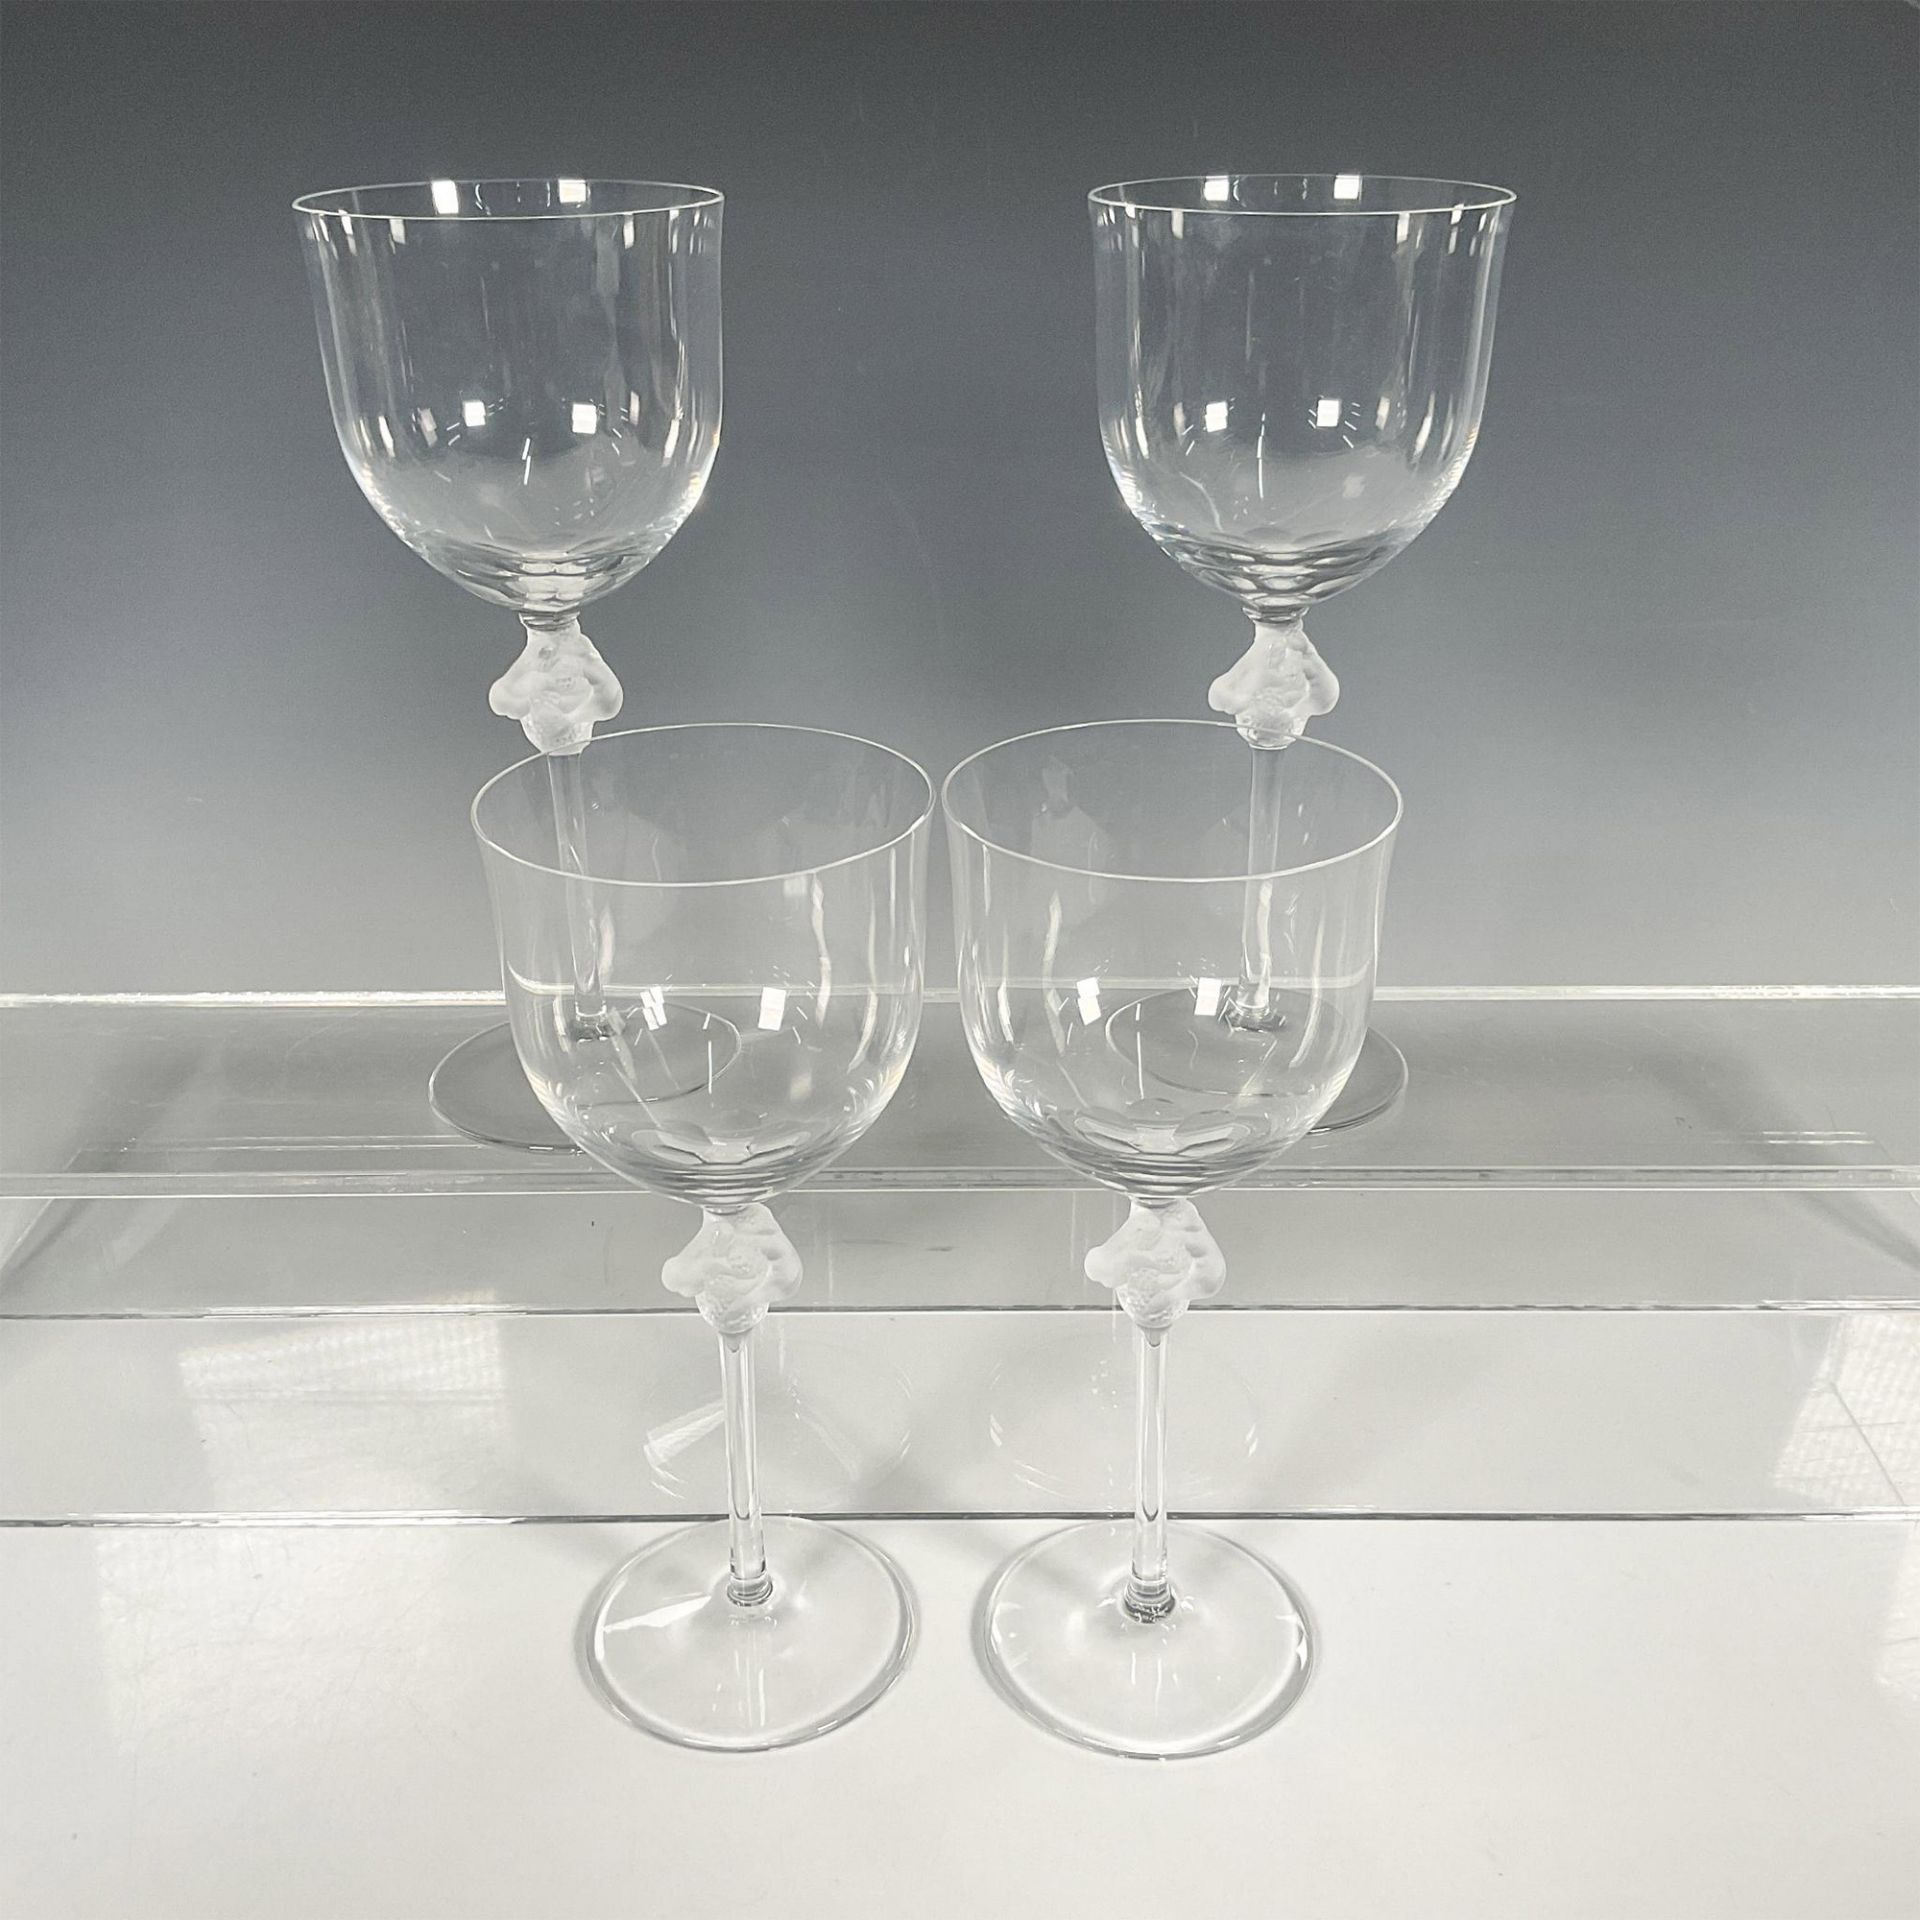 4pc Lalique Crystal Water Goblets, Roxane Pattern - Image 2 of 4